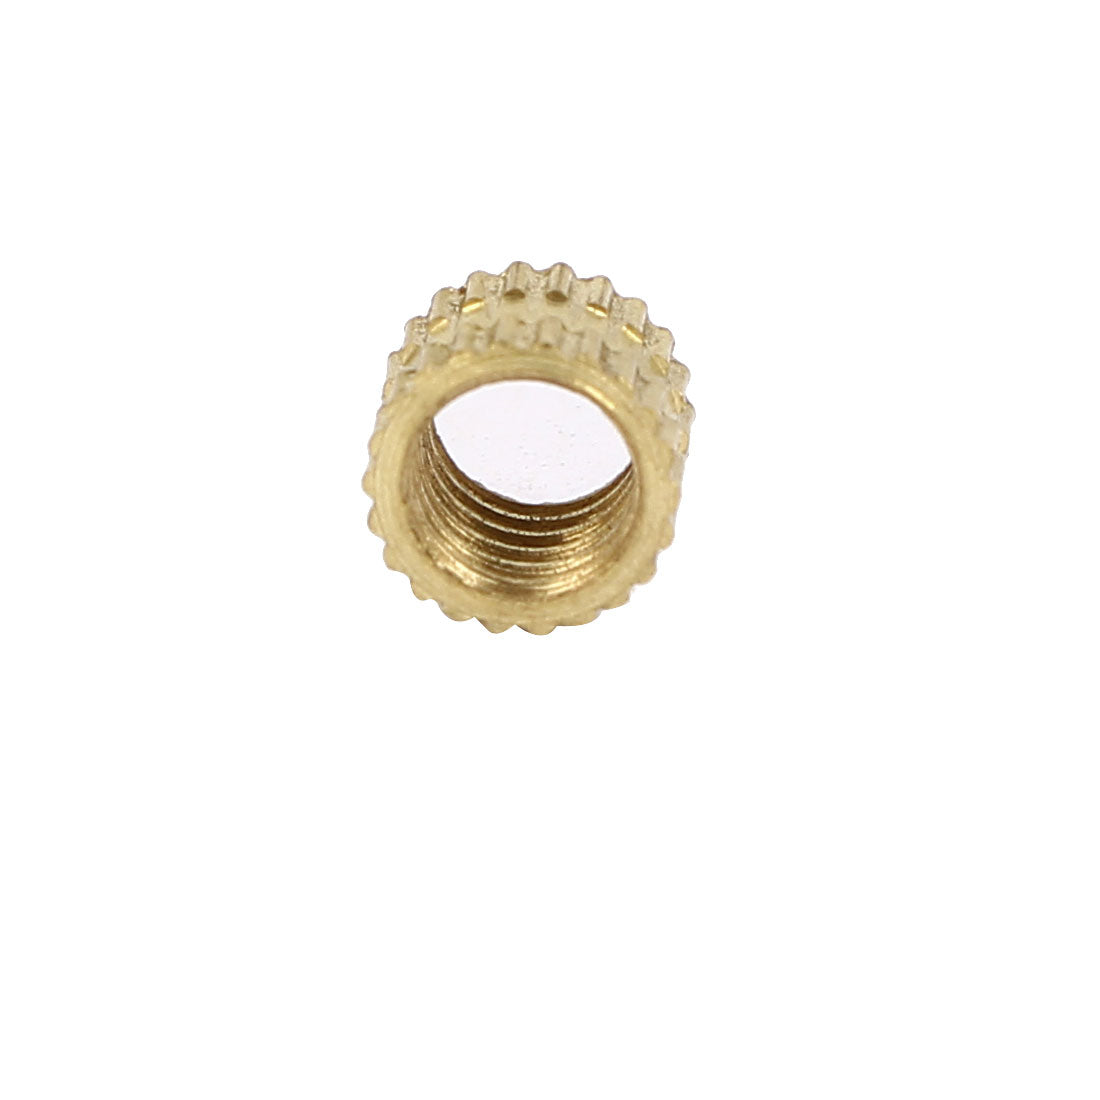 uxcell Uxcell M5 x 5mm 0.8mm Pitch Brass Knurled Threaded Round Insert Embedded Nuts 200PCS